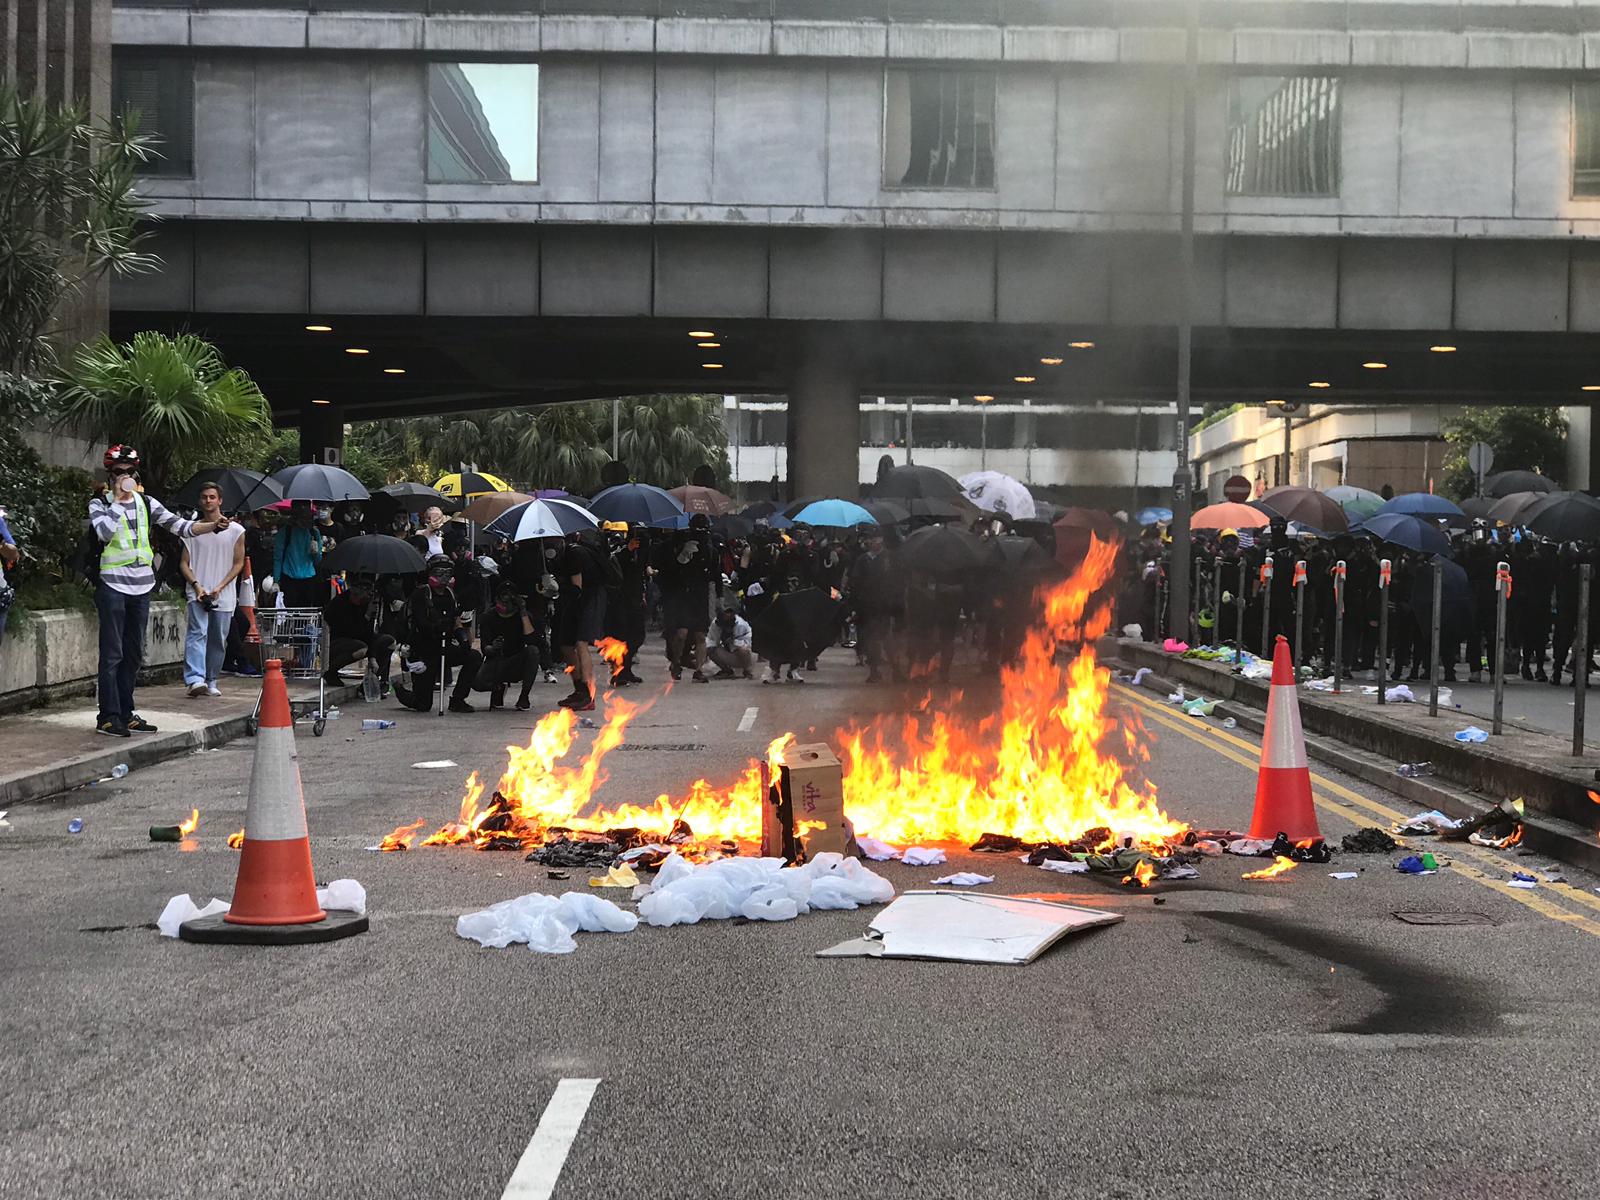 A fire burns on a street in the vicinity of the government office complex in Admiralty this afternoon as unsanctioned protests cropped up across the city. Photo by Samantha Mei Topp.